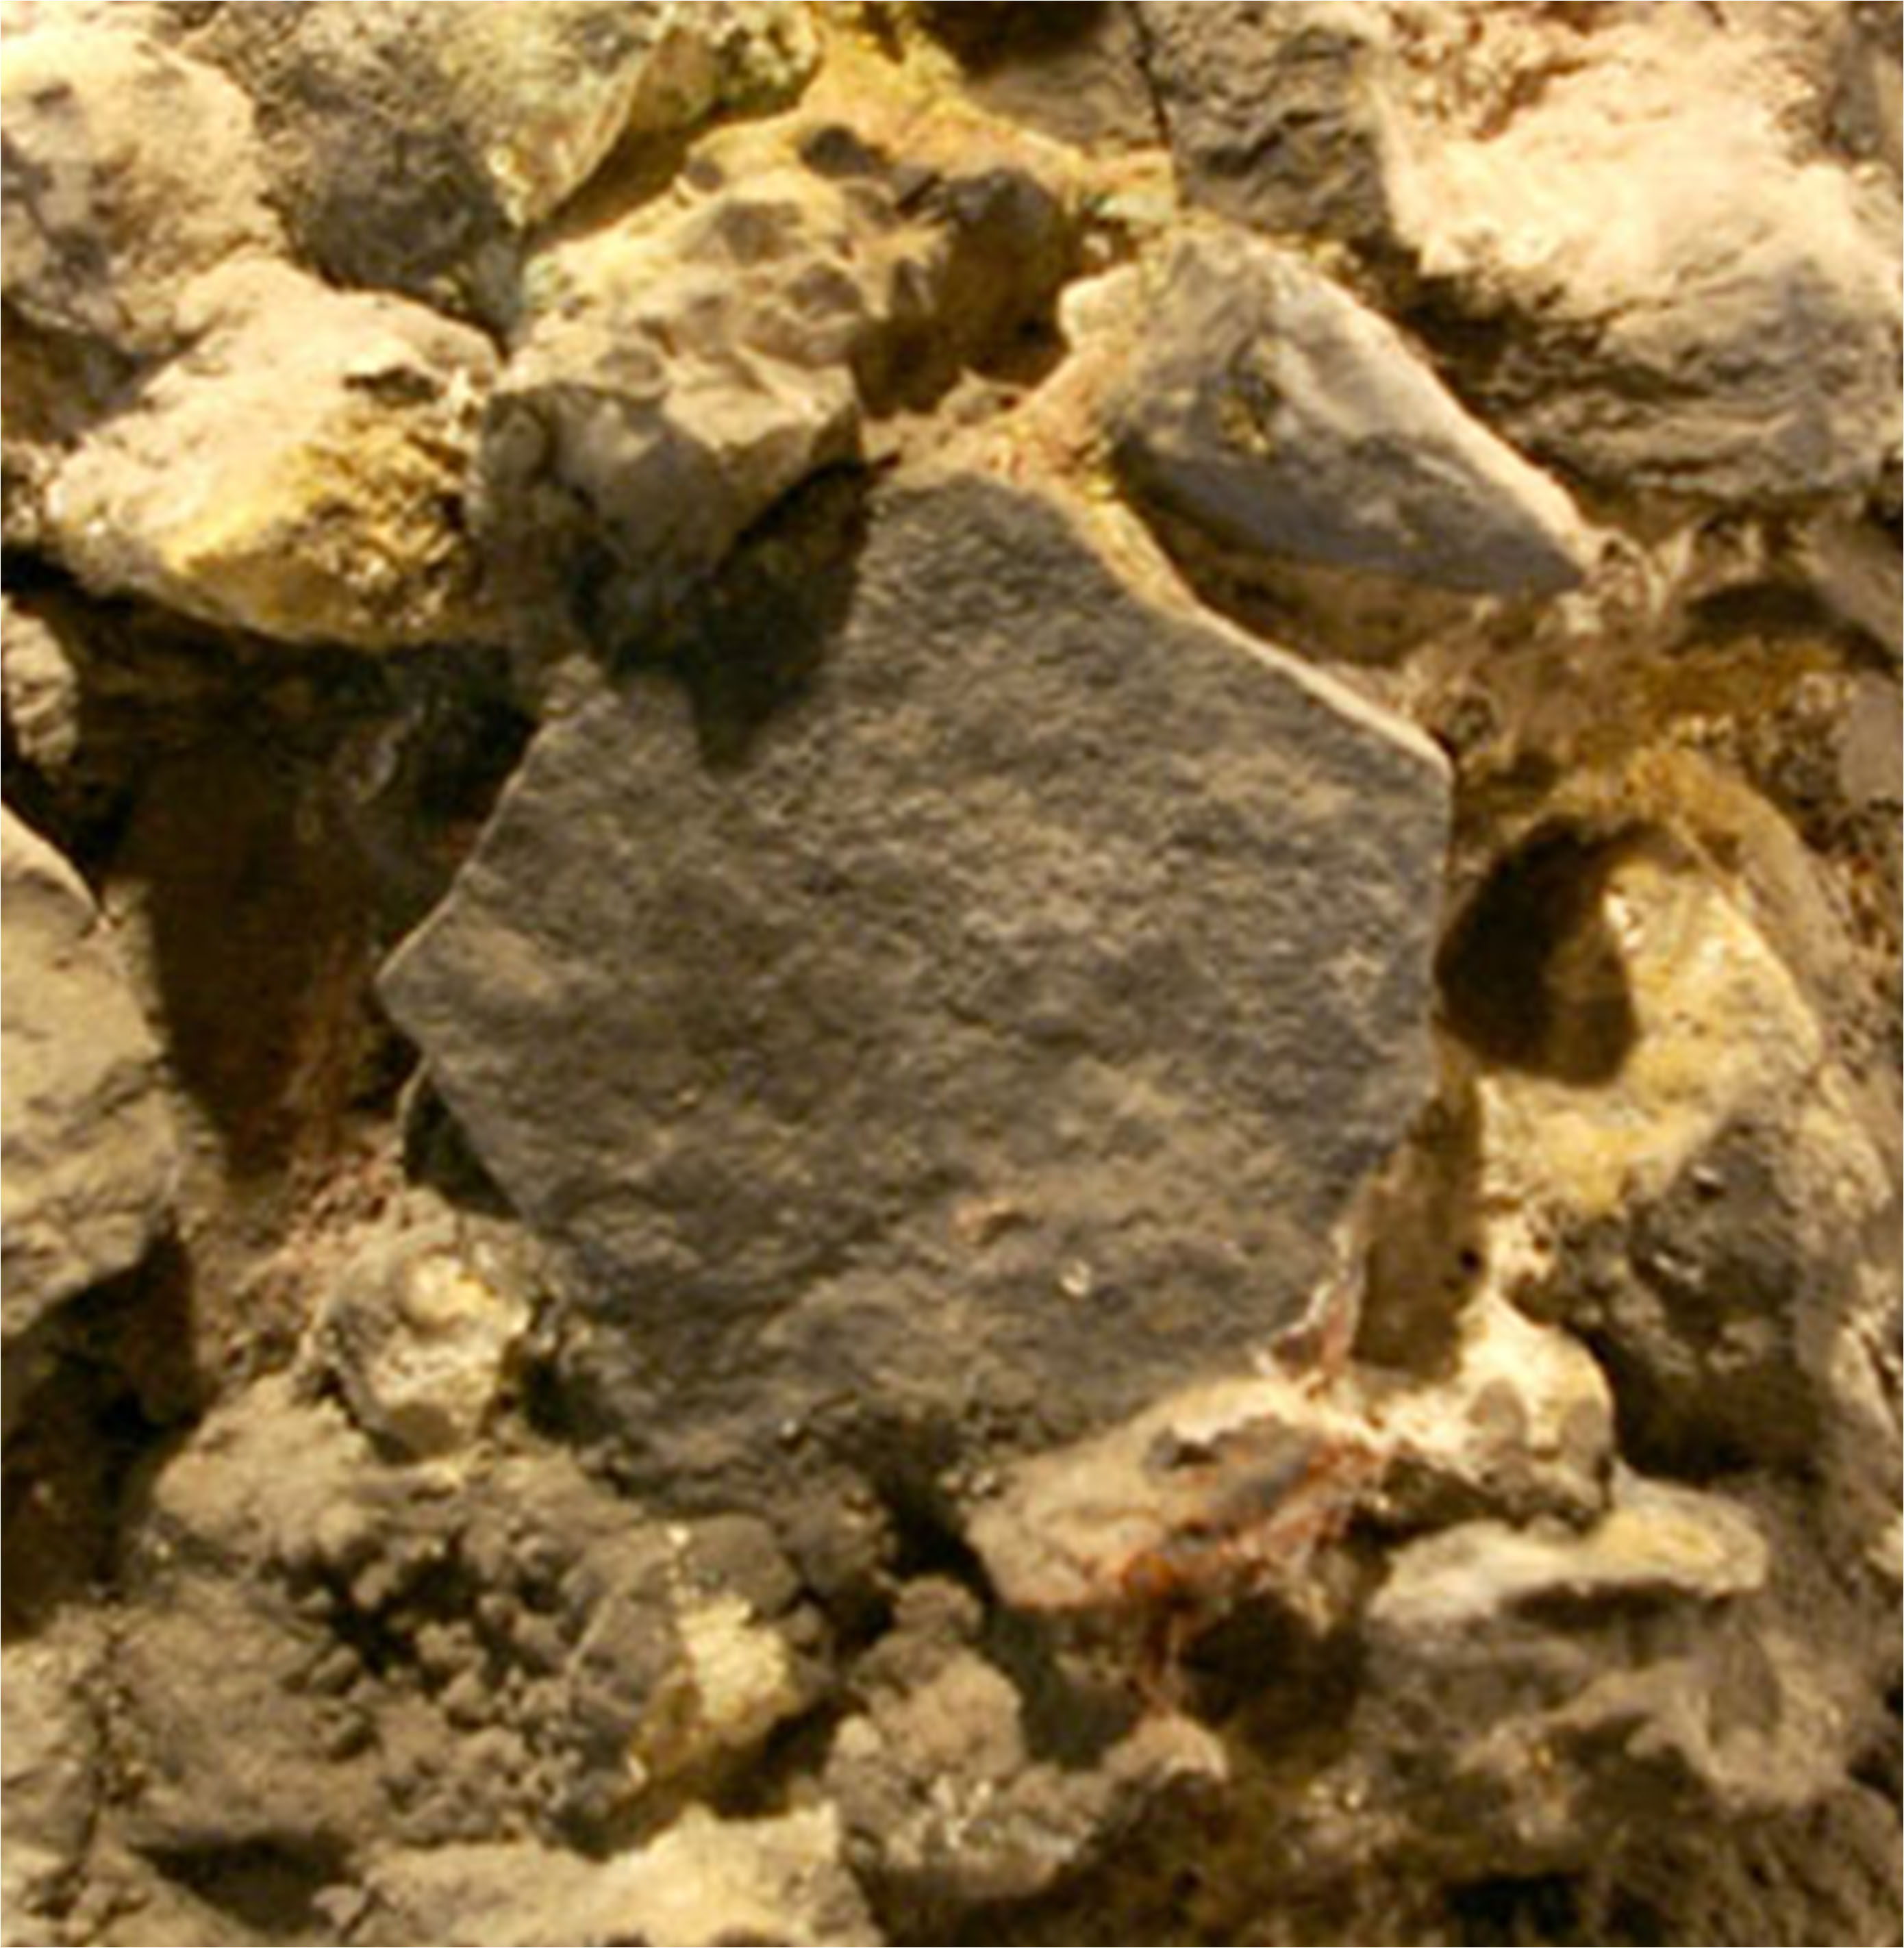 One of the pieces of basalt from the Giant's Causeway